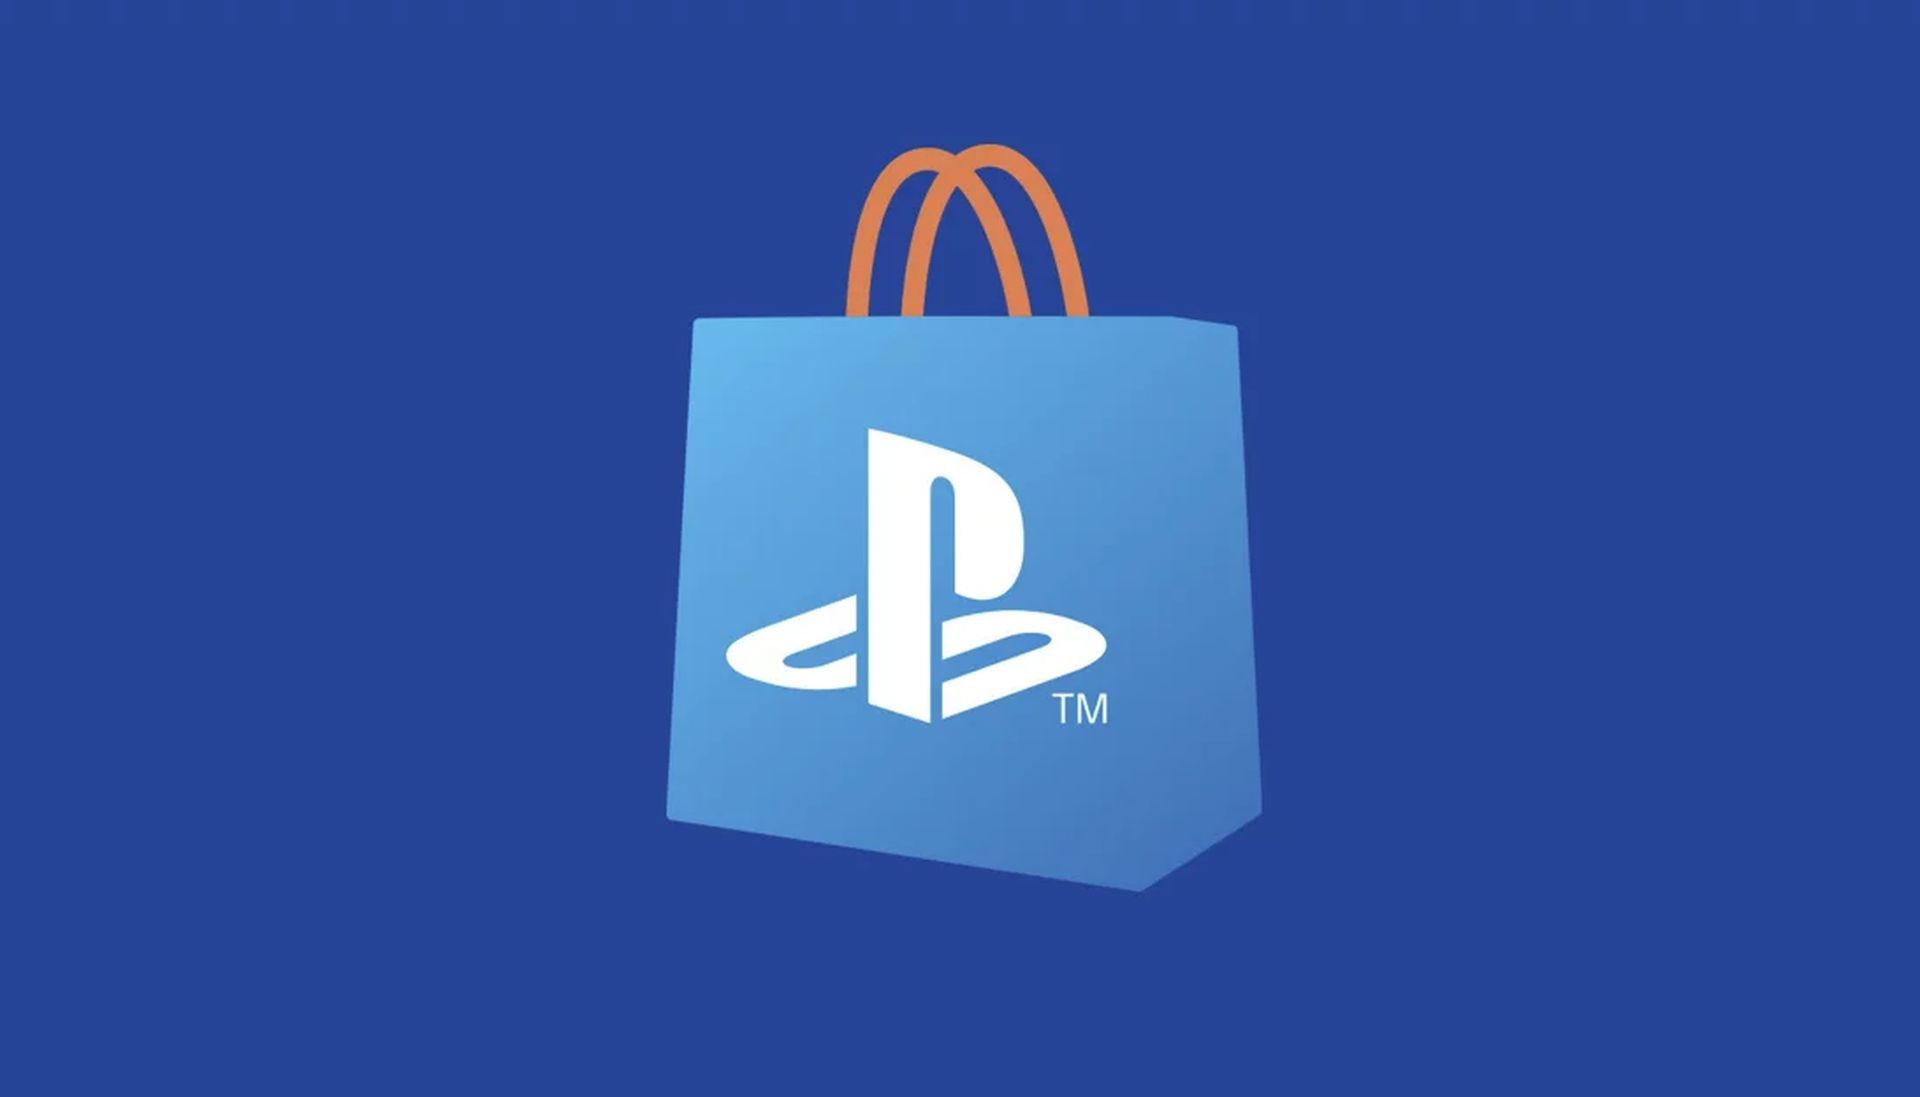 Explore Sony PlayStation Store lawsuit: allegations of inflated prices & anti-competitive practices, impacting gaming's digital marketplace